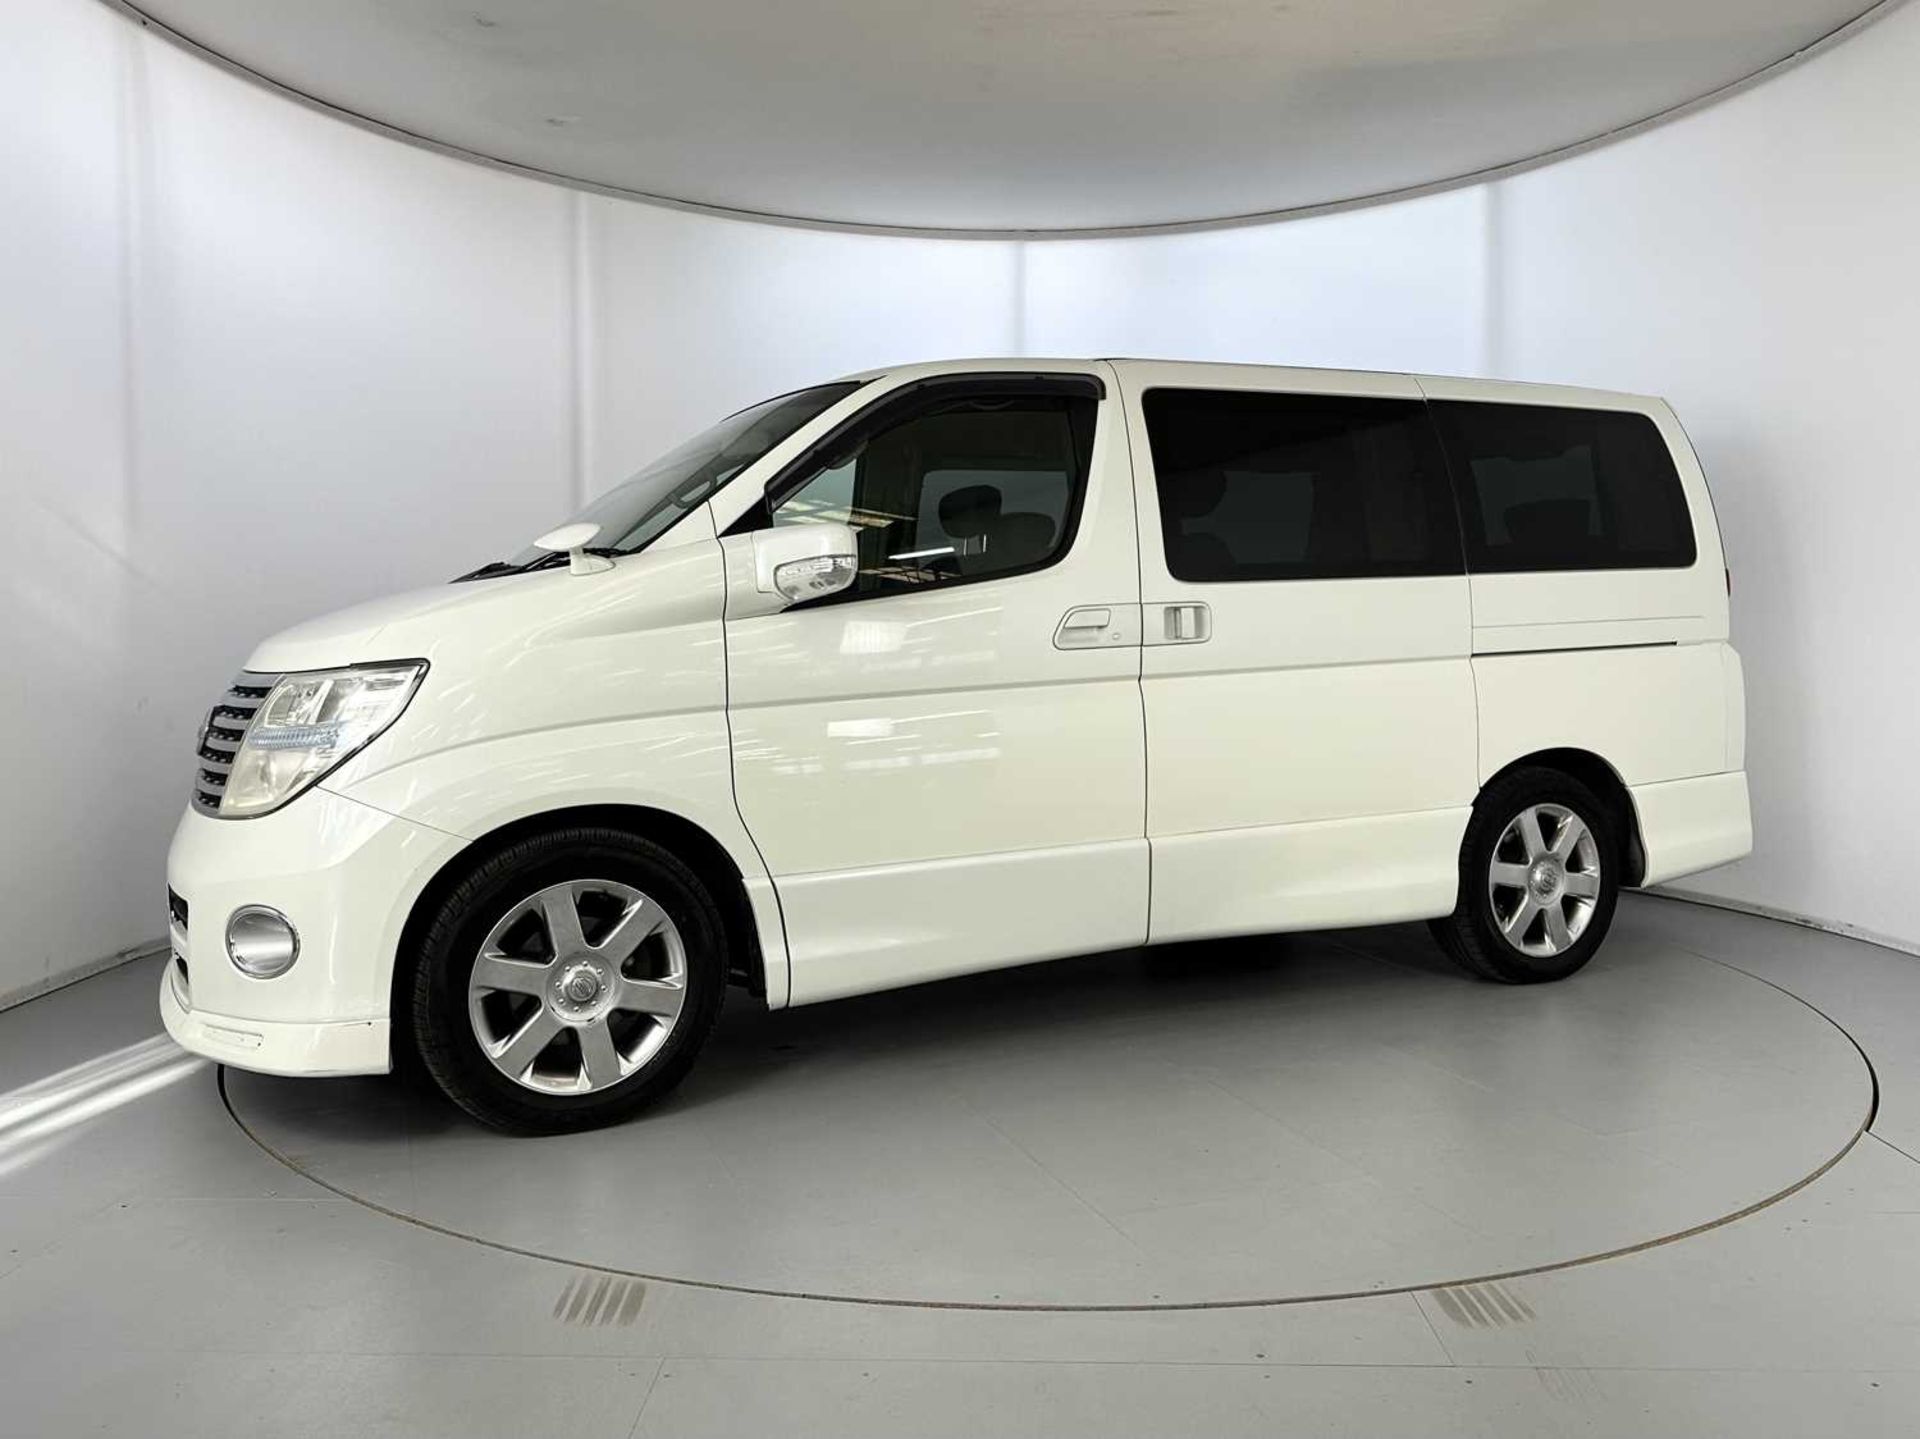 2007 Nissan Elgrand - Highway Star Edition 4WD - Image 4 of 39